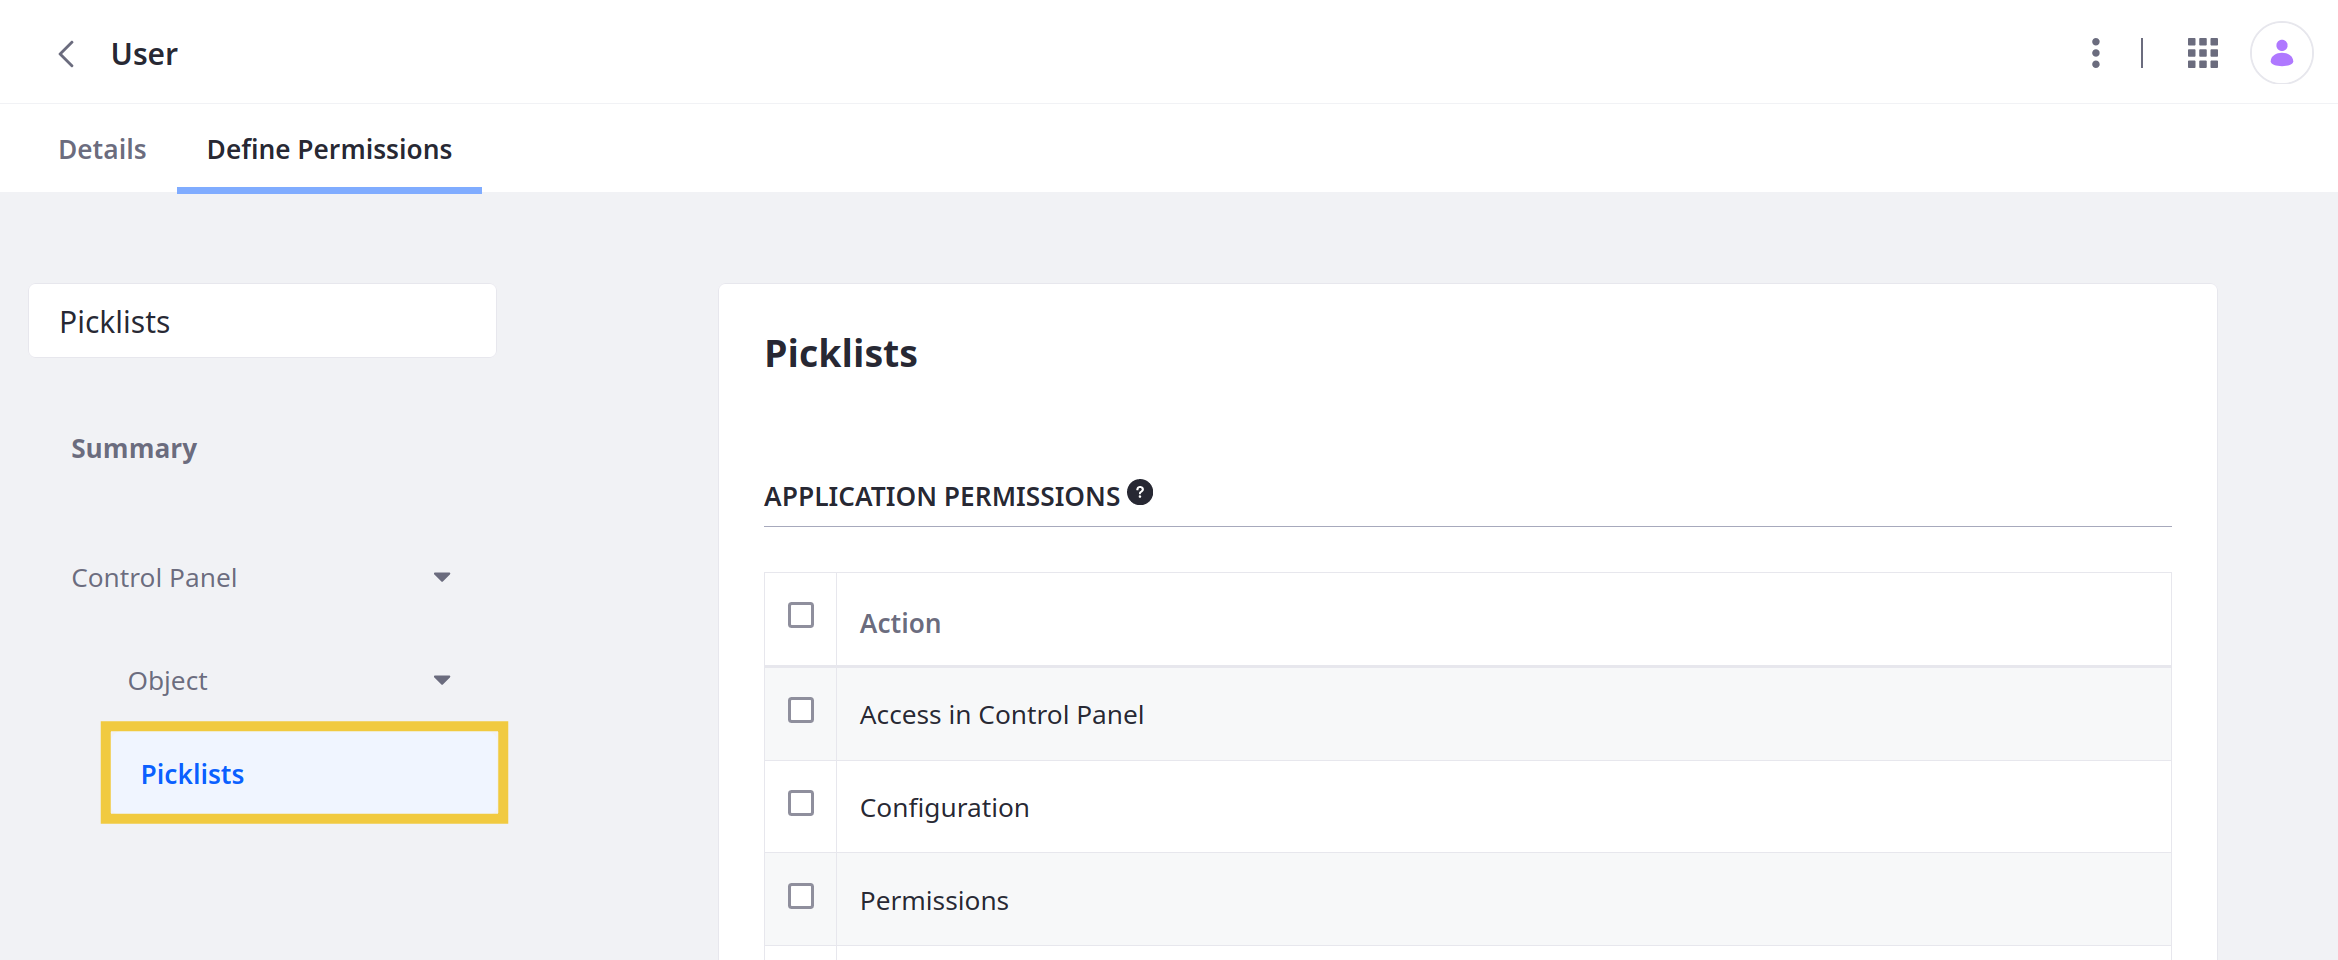 Assign Picklist permissions when defining Role permissions.